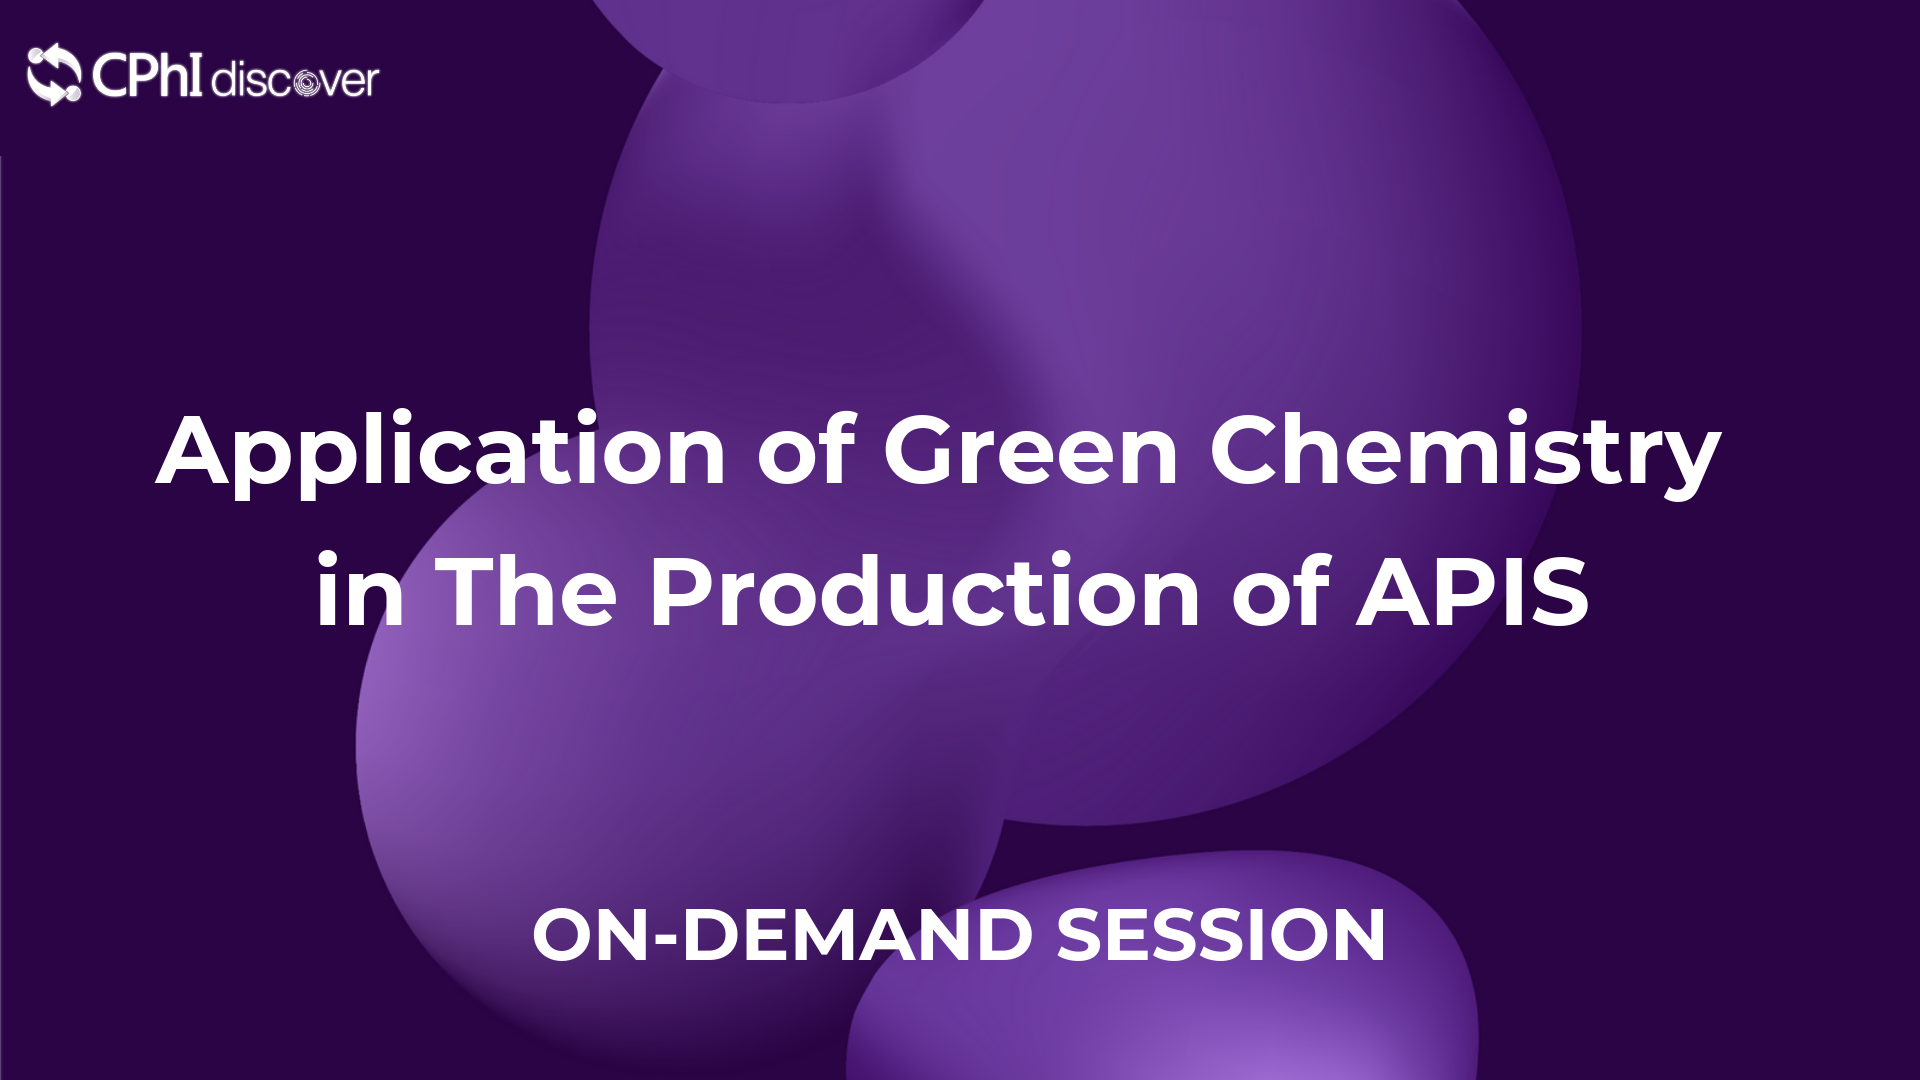 Applications of Green Chemistry in API Production